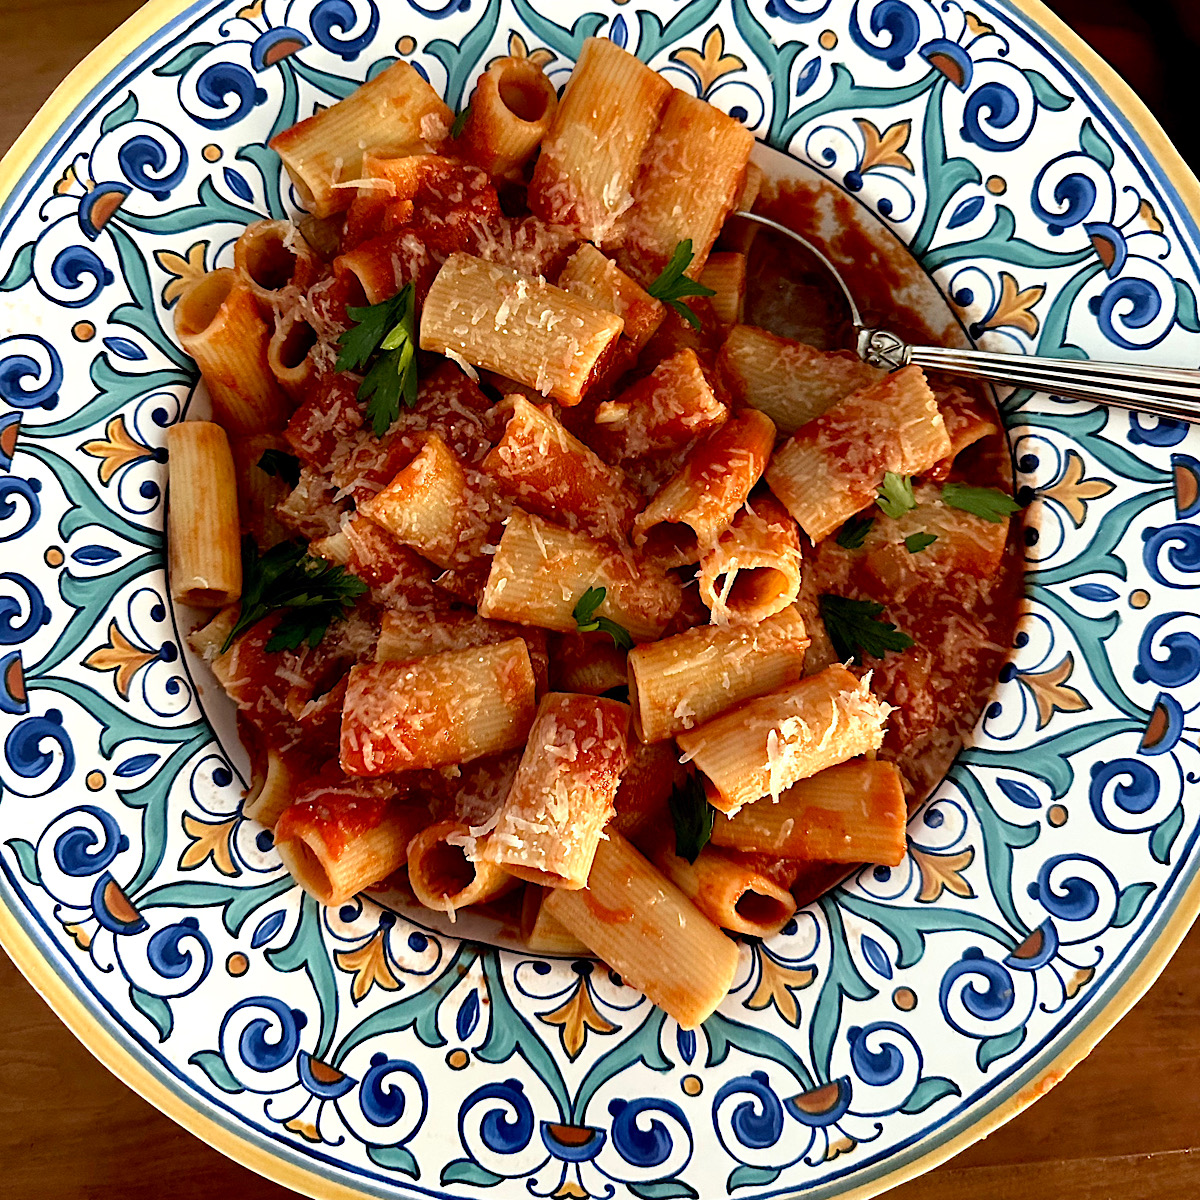 Rigatoni with tomato sauce and grated cheese